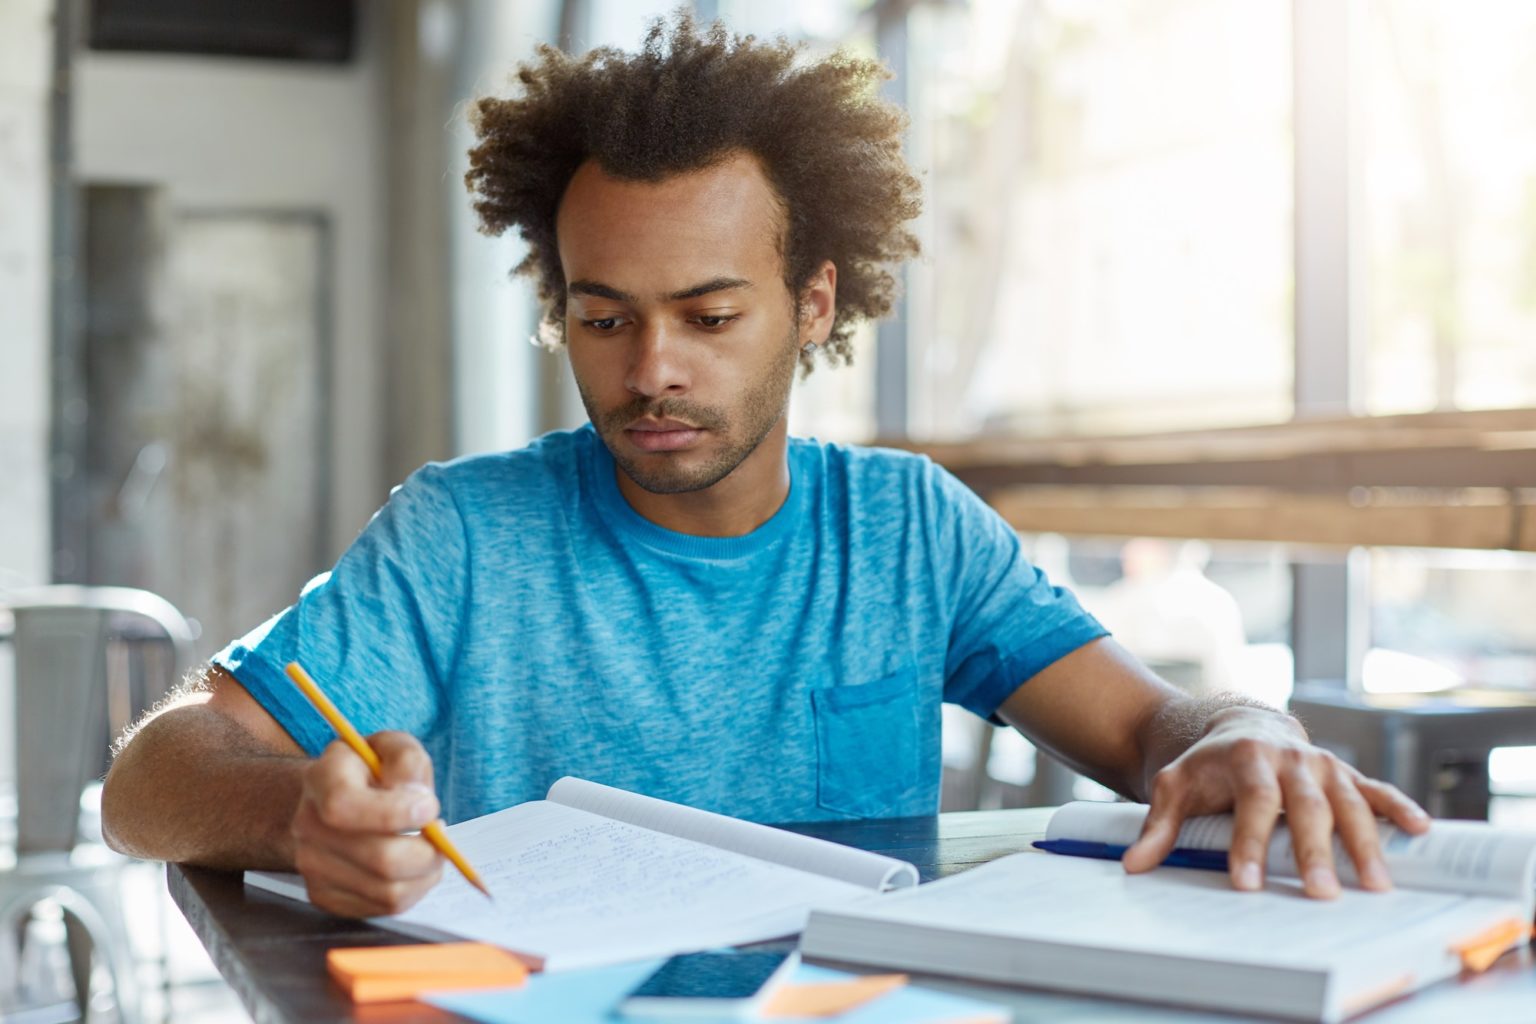 Handsome Afro American graduate student with curly hairstyle sitting at desk with book and copybook,